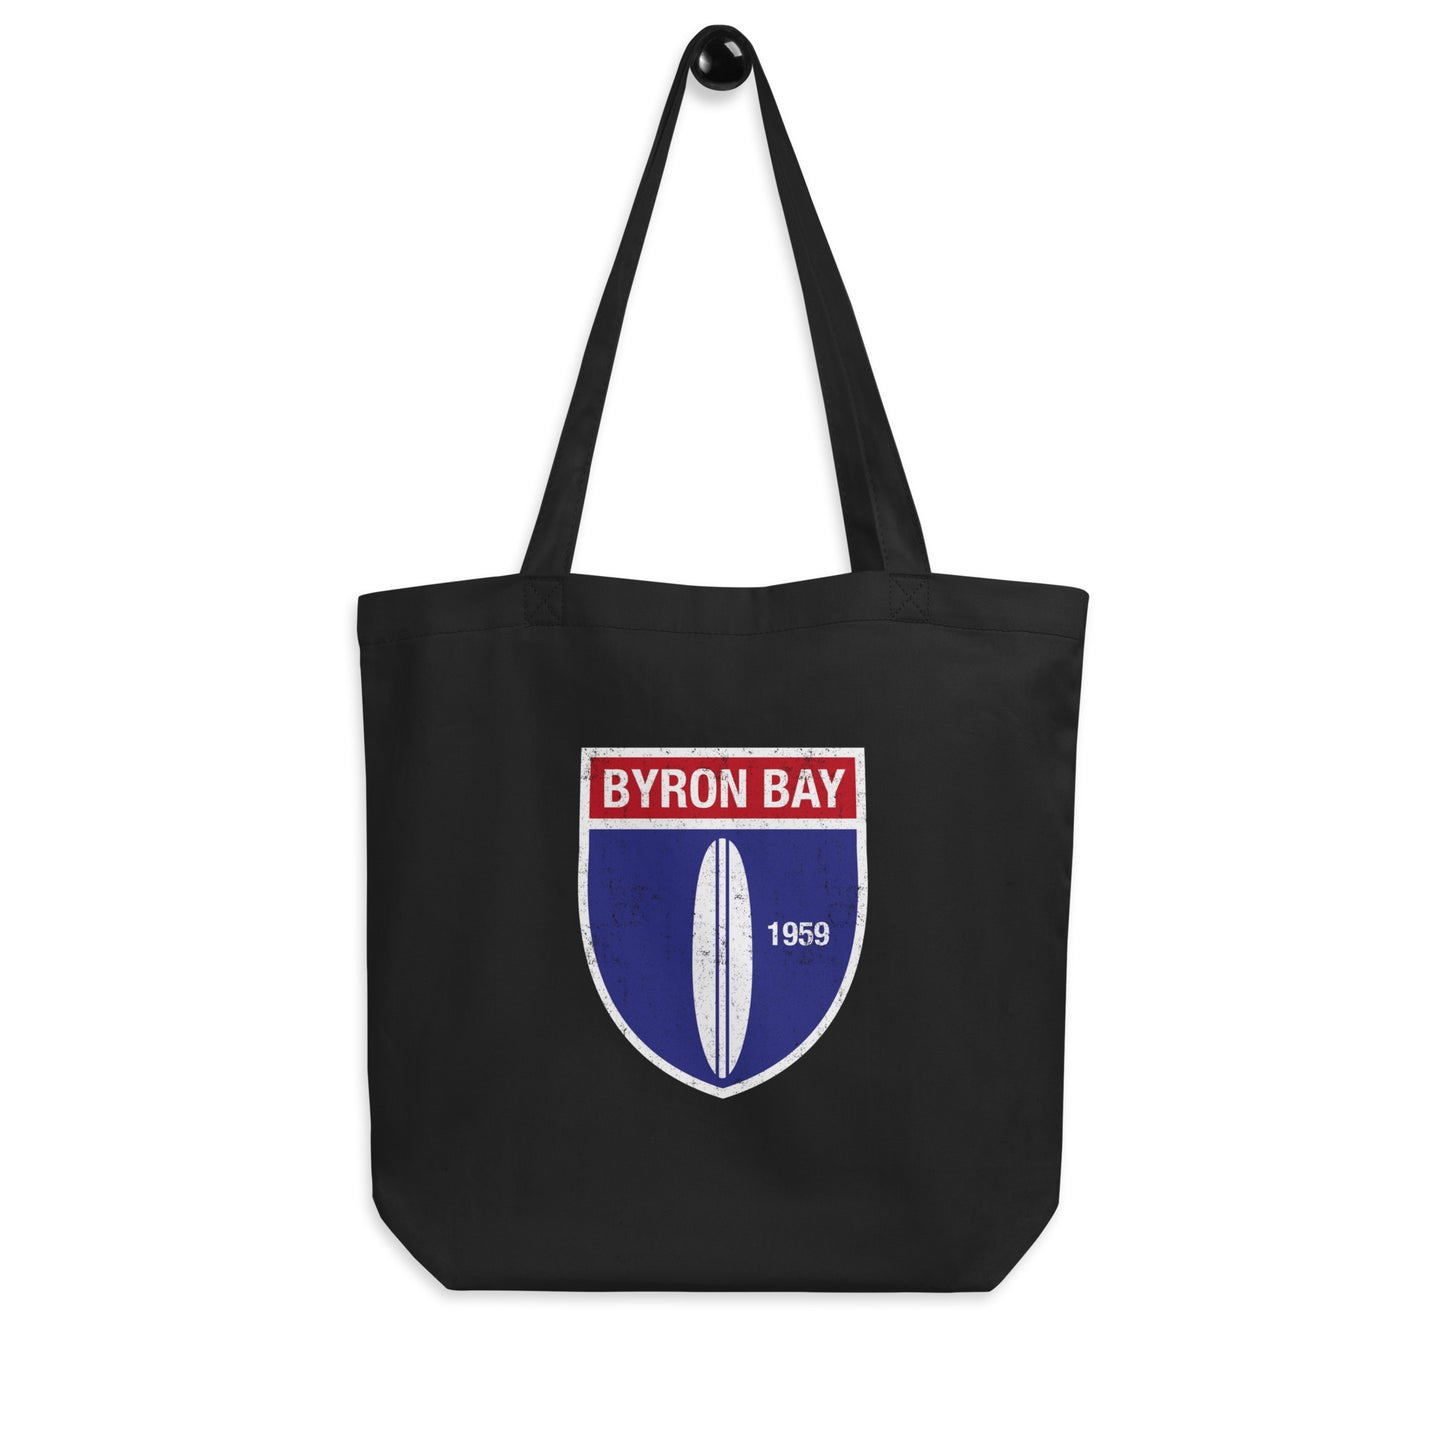  Eco Tote Bag - Black  - Front view - With Byron Bay Vintage logo front - Genuine Byron Bay Merchandise | Produced by Go Sea Kayak Byron Bay 